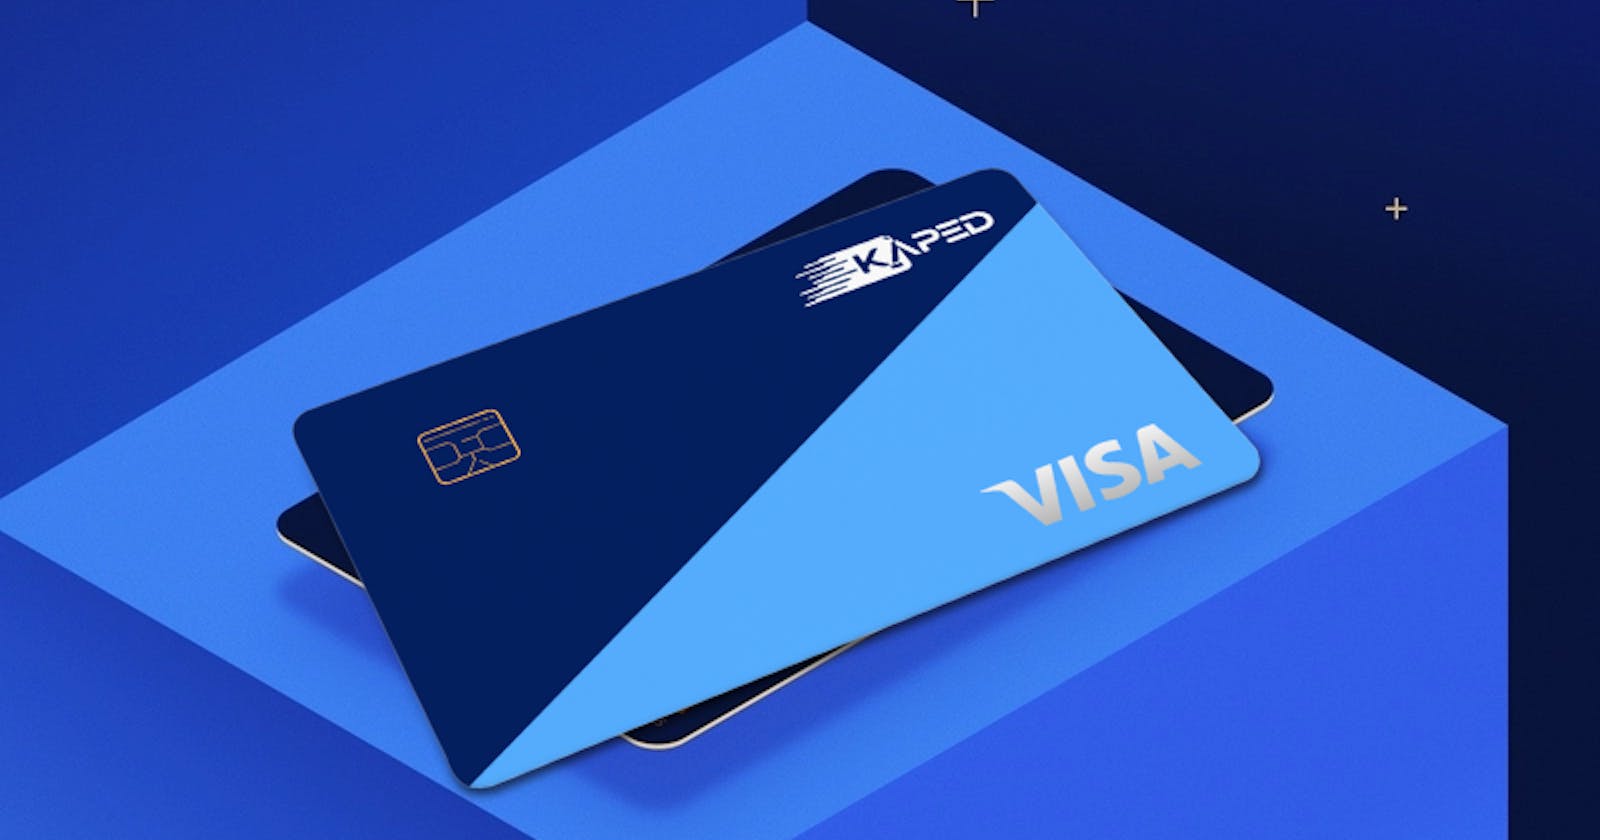 The Advantages of Integrating an Embedded Credit Card Into Your Tech Platform